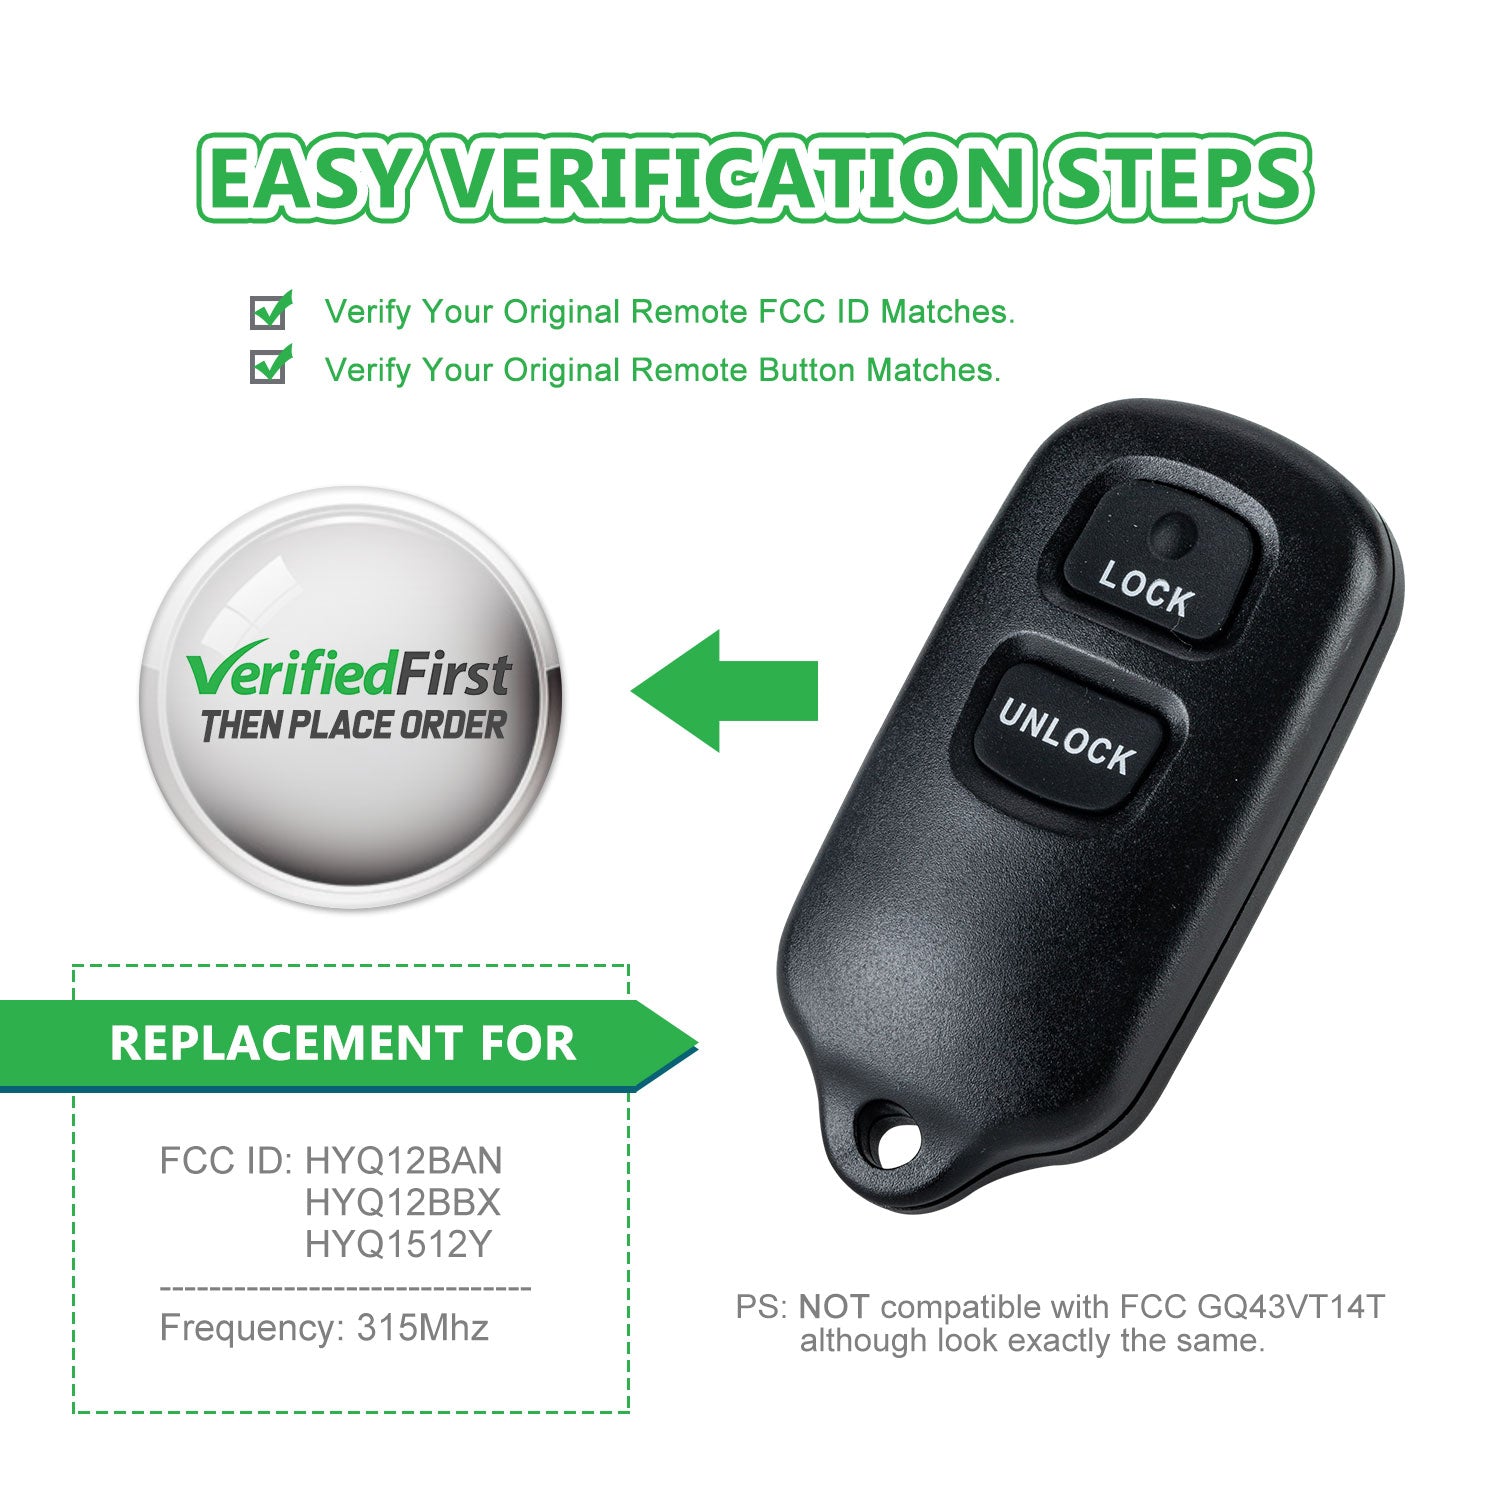 Lots of 10 Extra-Partss Car Remote Fob Replacement for Toyot-a HYQ12BAN, HYQ12BBX, HYQ1512Y fits 2001 2002 2003 Prius